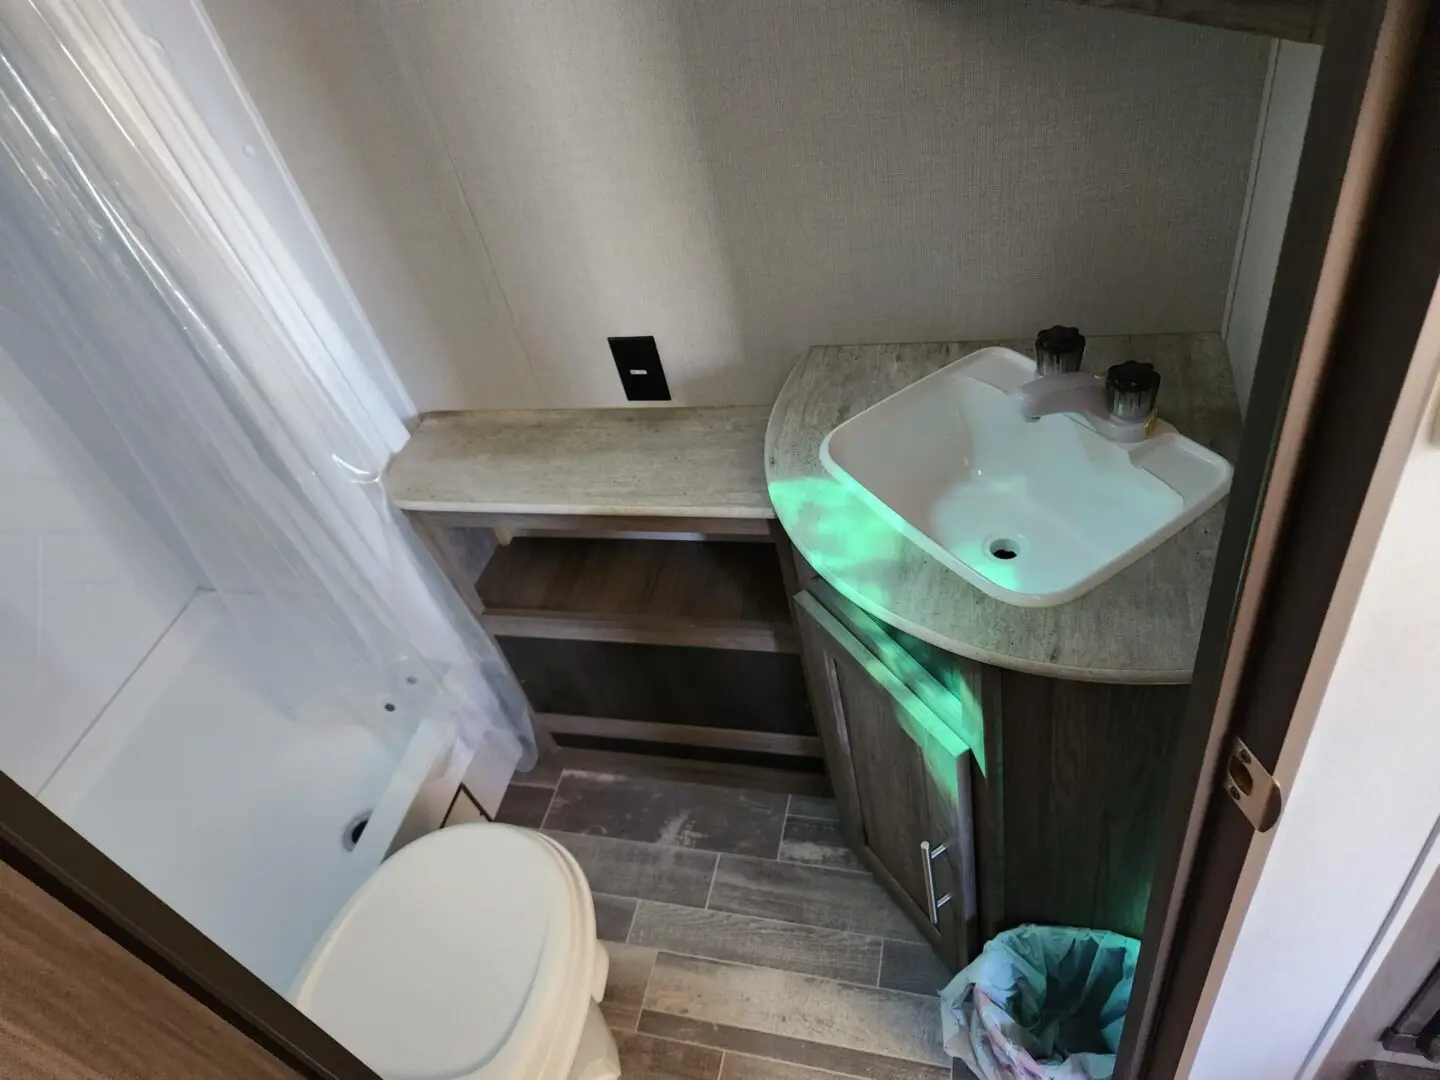 A bathroom with a sink and toilet in it